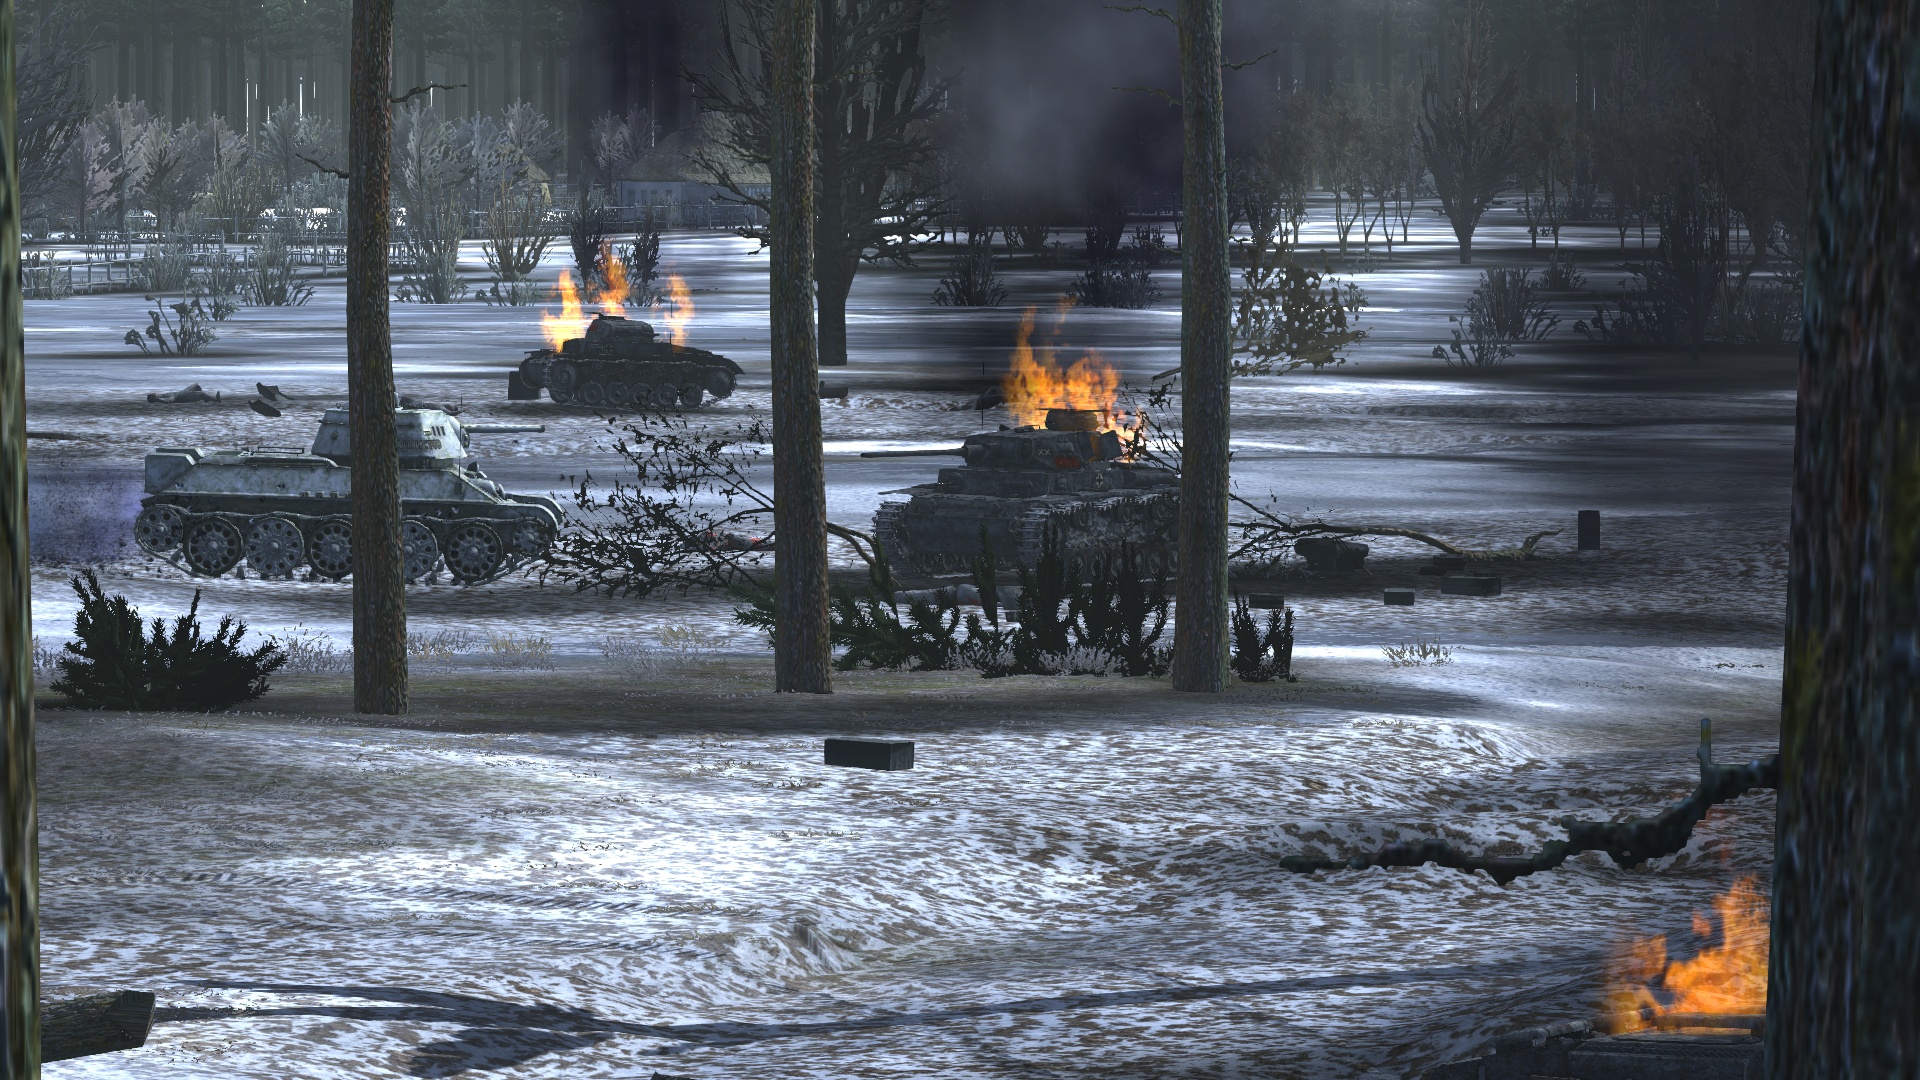 achtung panzer operation star pc gameplay